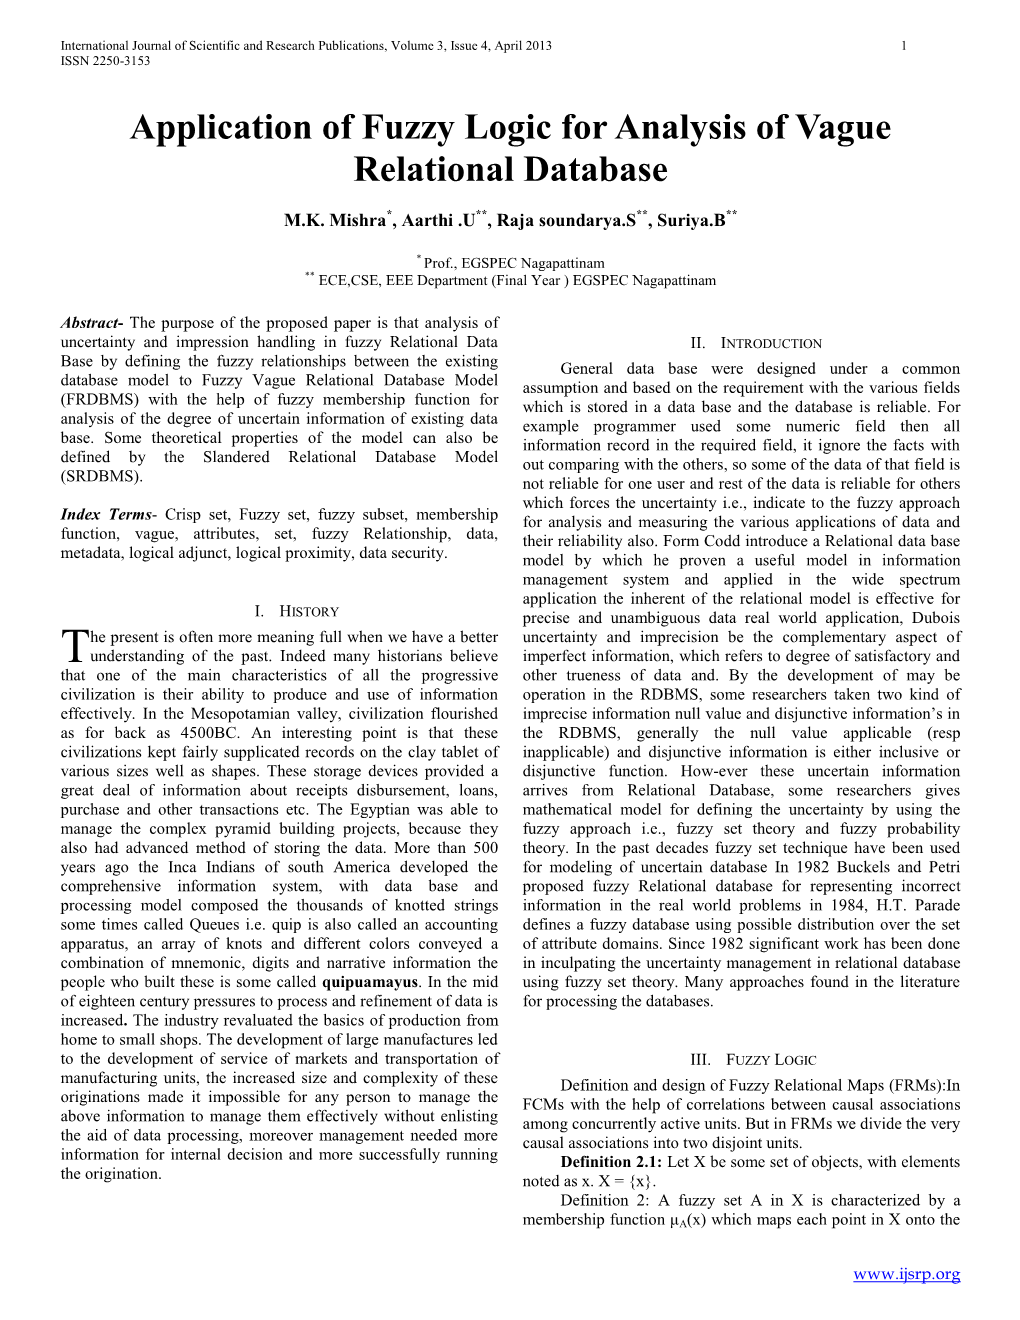 Application of Fuzzy Logic for Analysis of Vague Relational Database